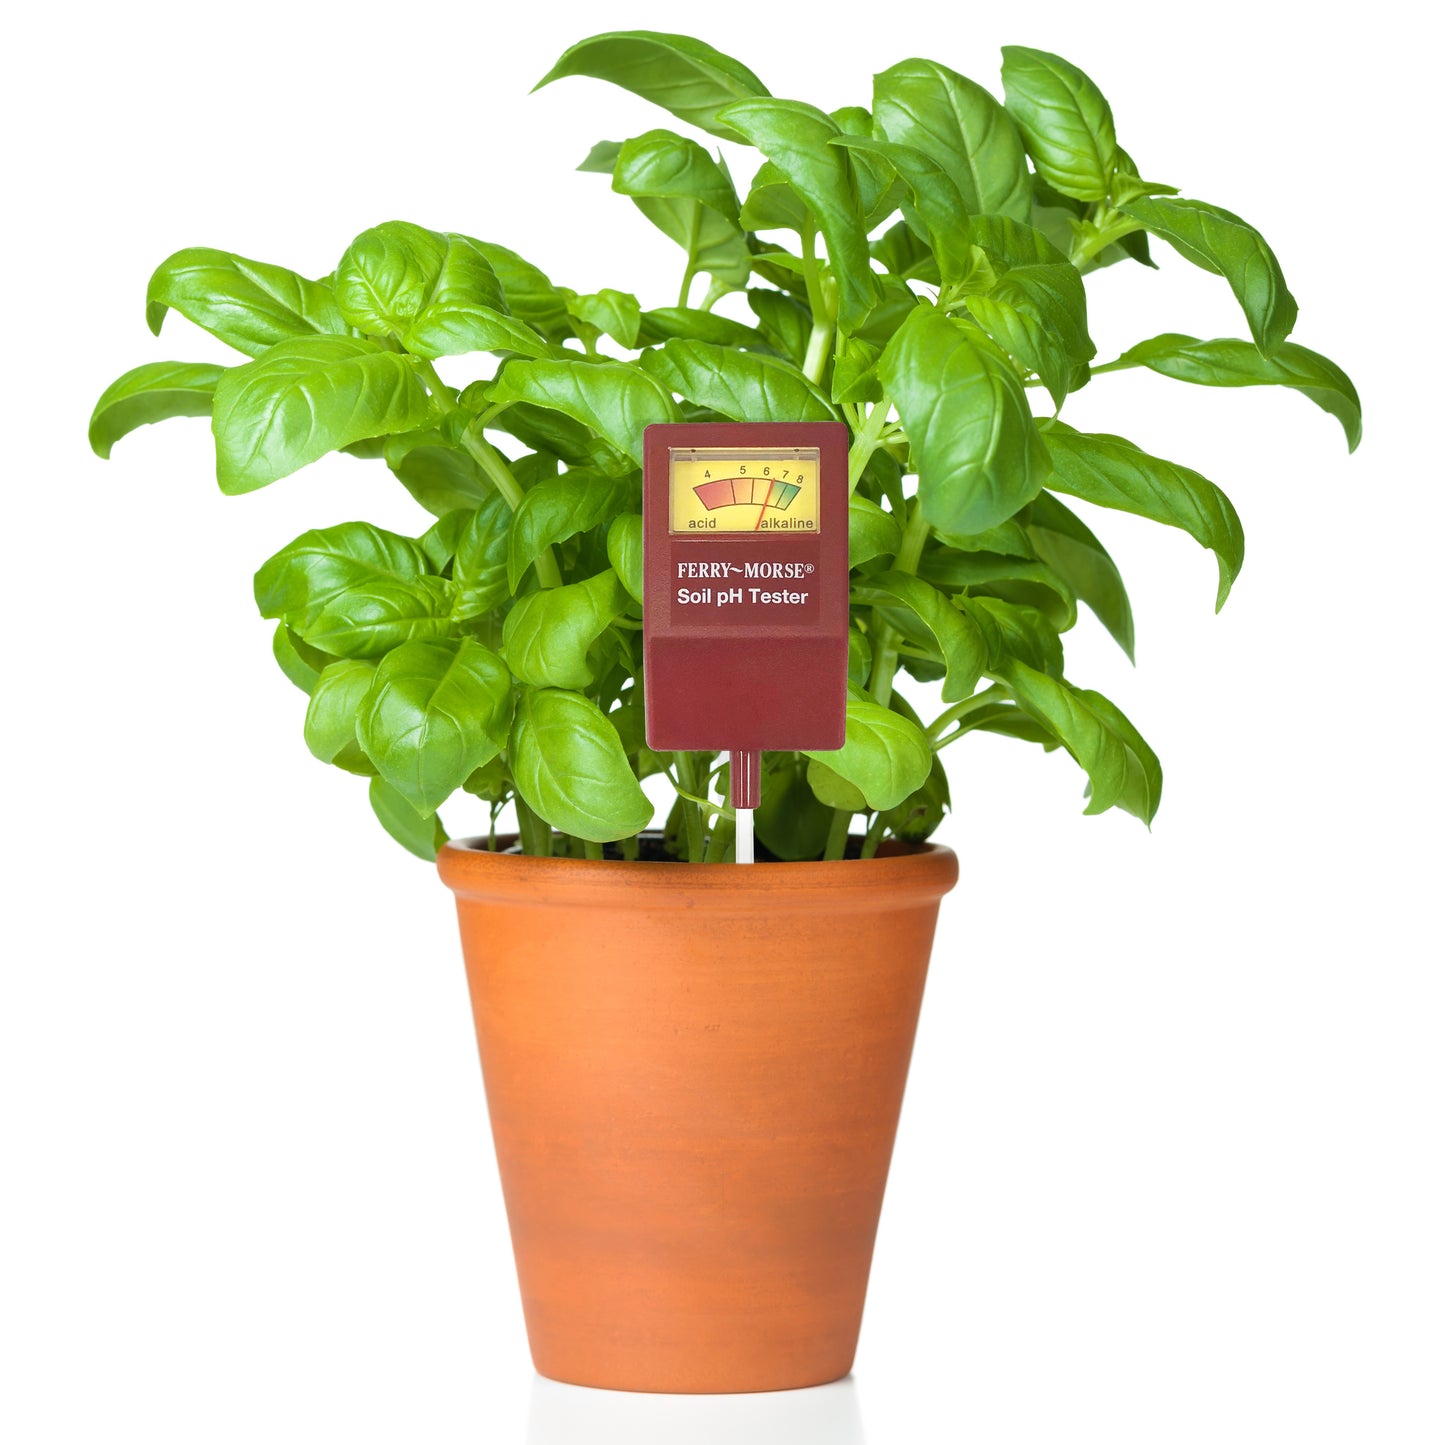 Soil pH Tested in a potted basil plant